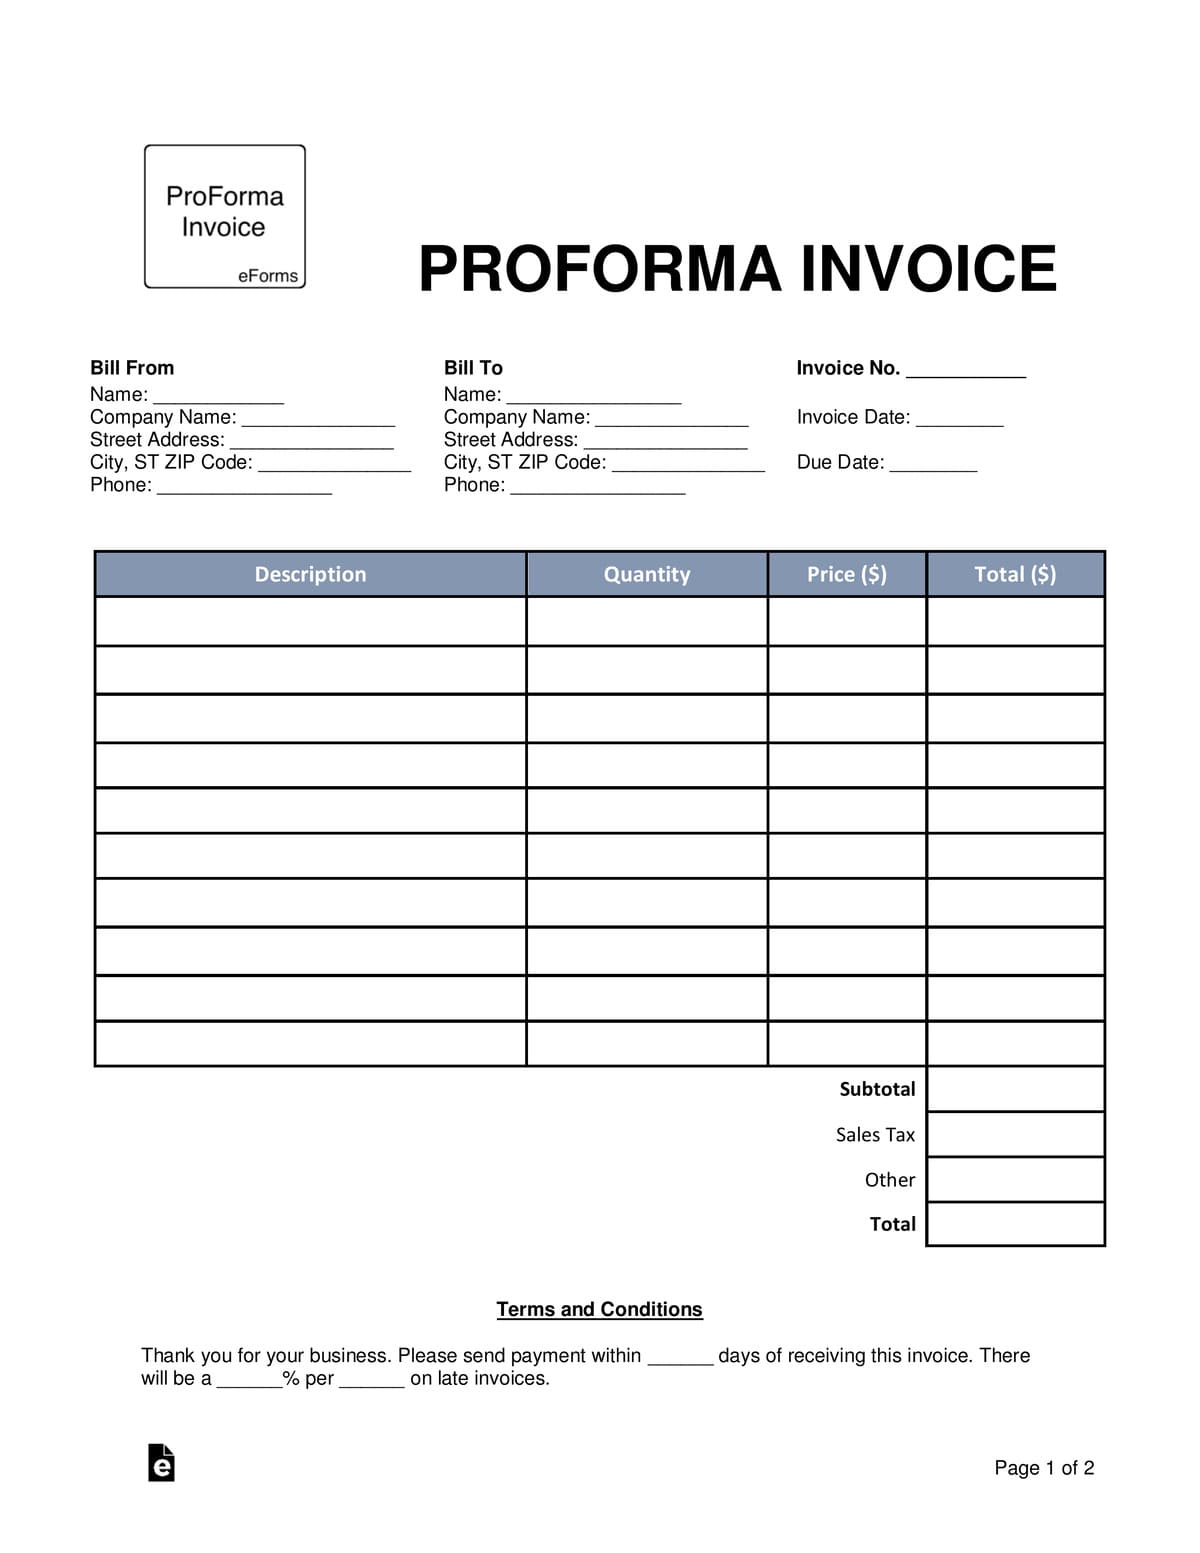 Invoice form - DiFreight